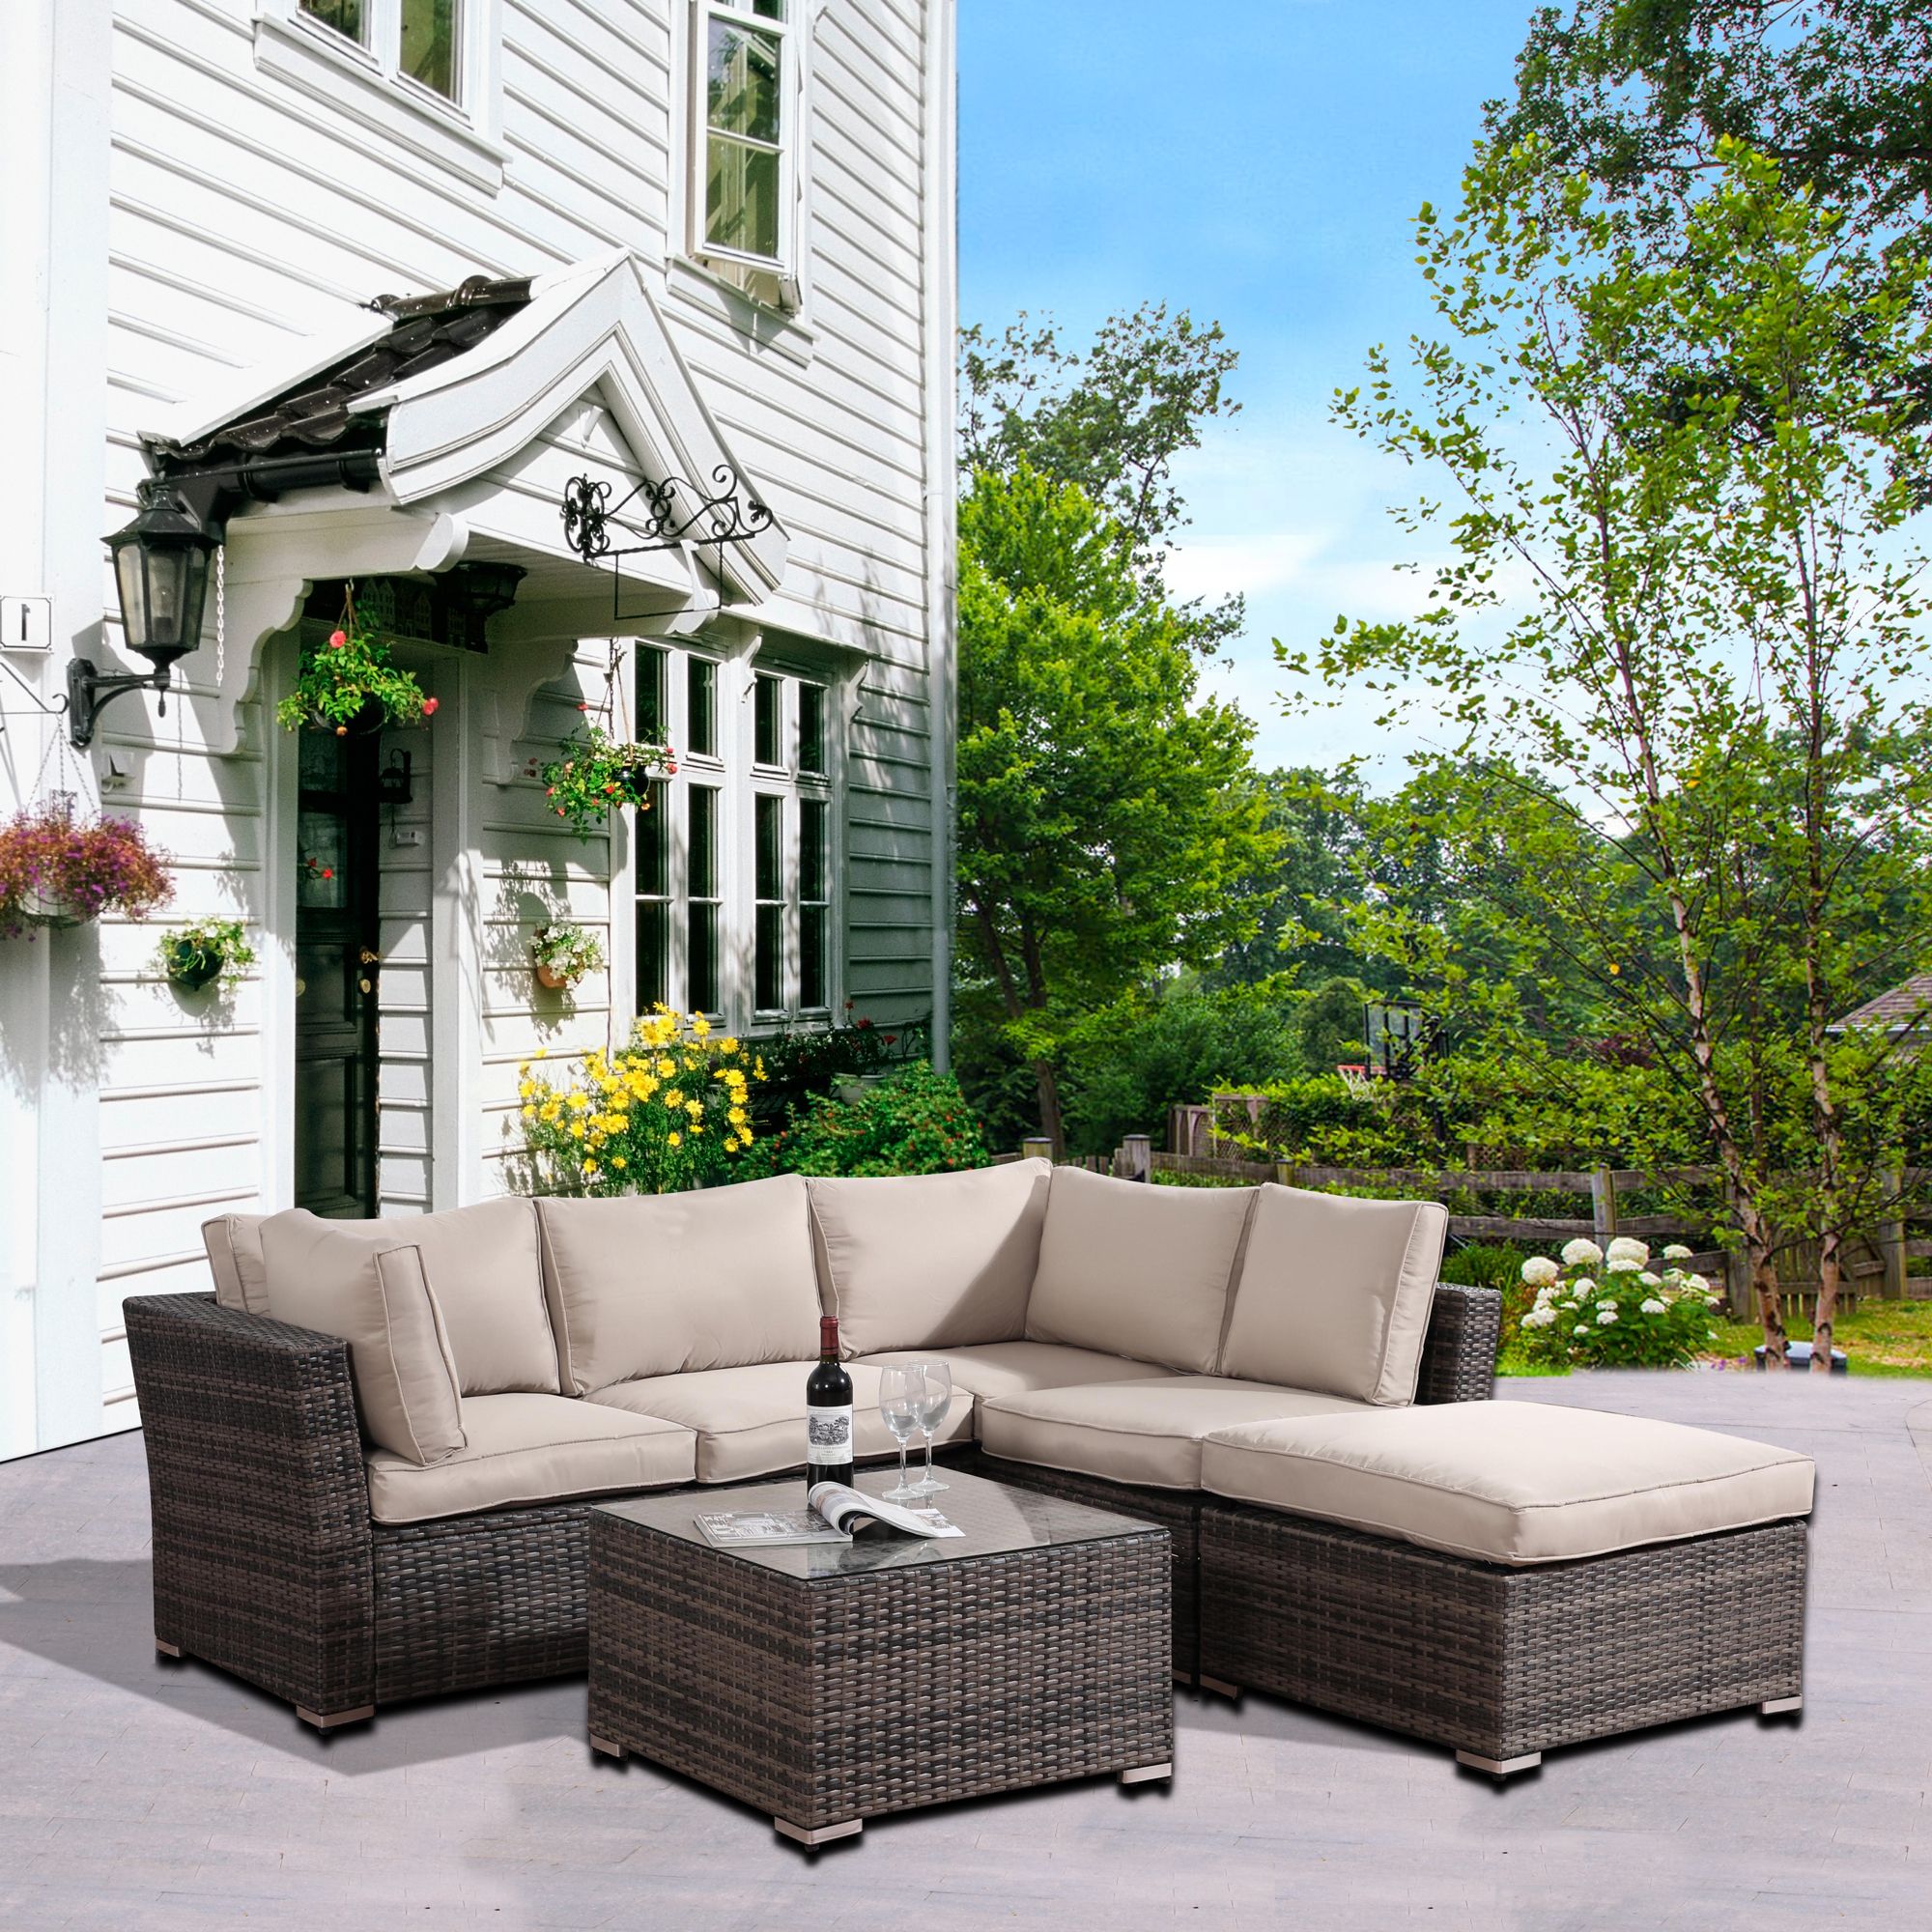 4 Piece Outdoor Patio Sets Inside Widely Used Patio Furniture Set Clearance, 4 Piece Patio Furniture Sets With (View 5 of 15)